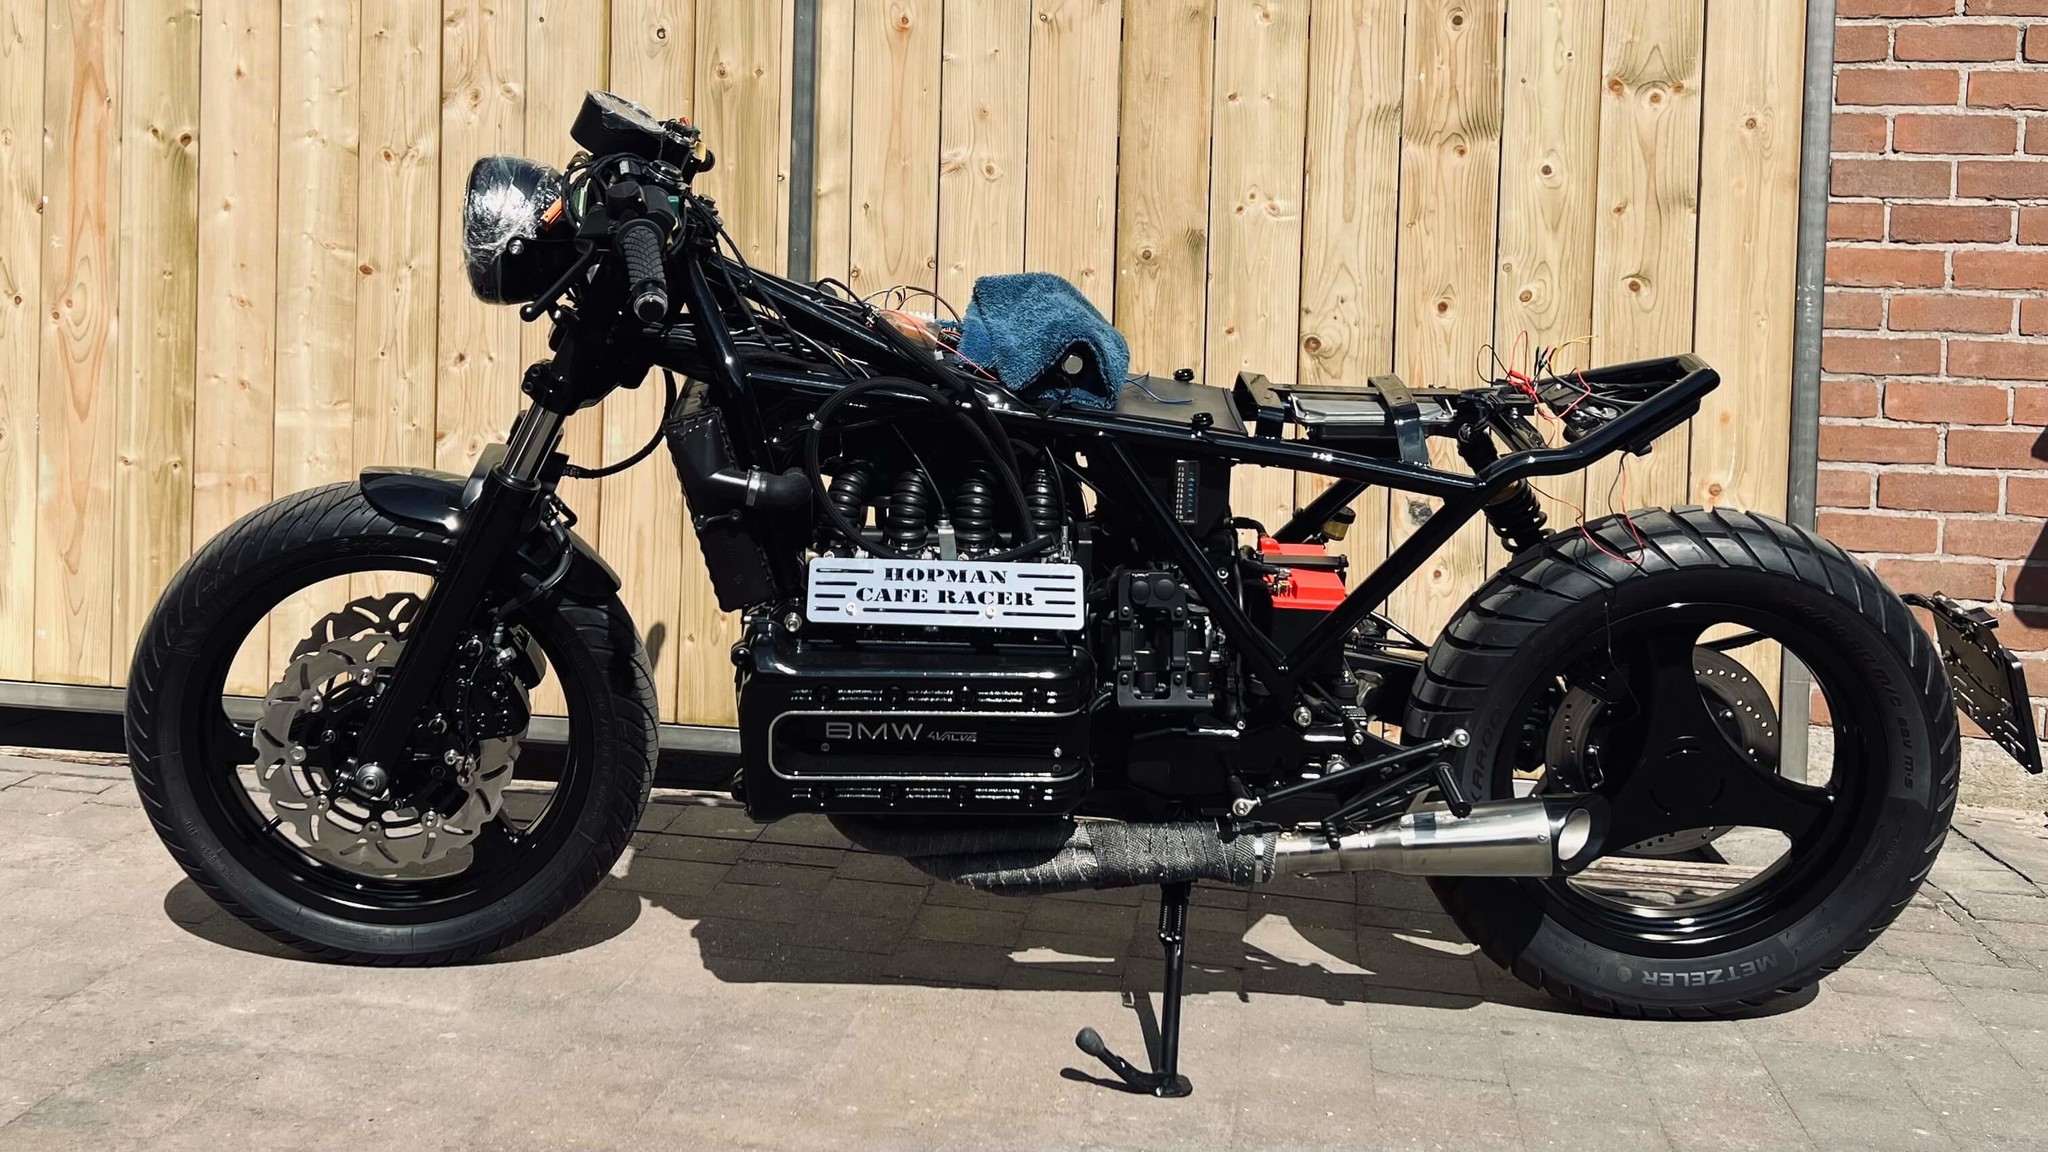 Bmw K1100 - The Story Behind The Bike - Caferacerwebshop.Com